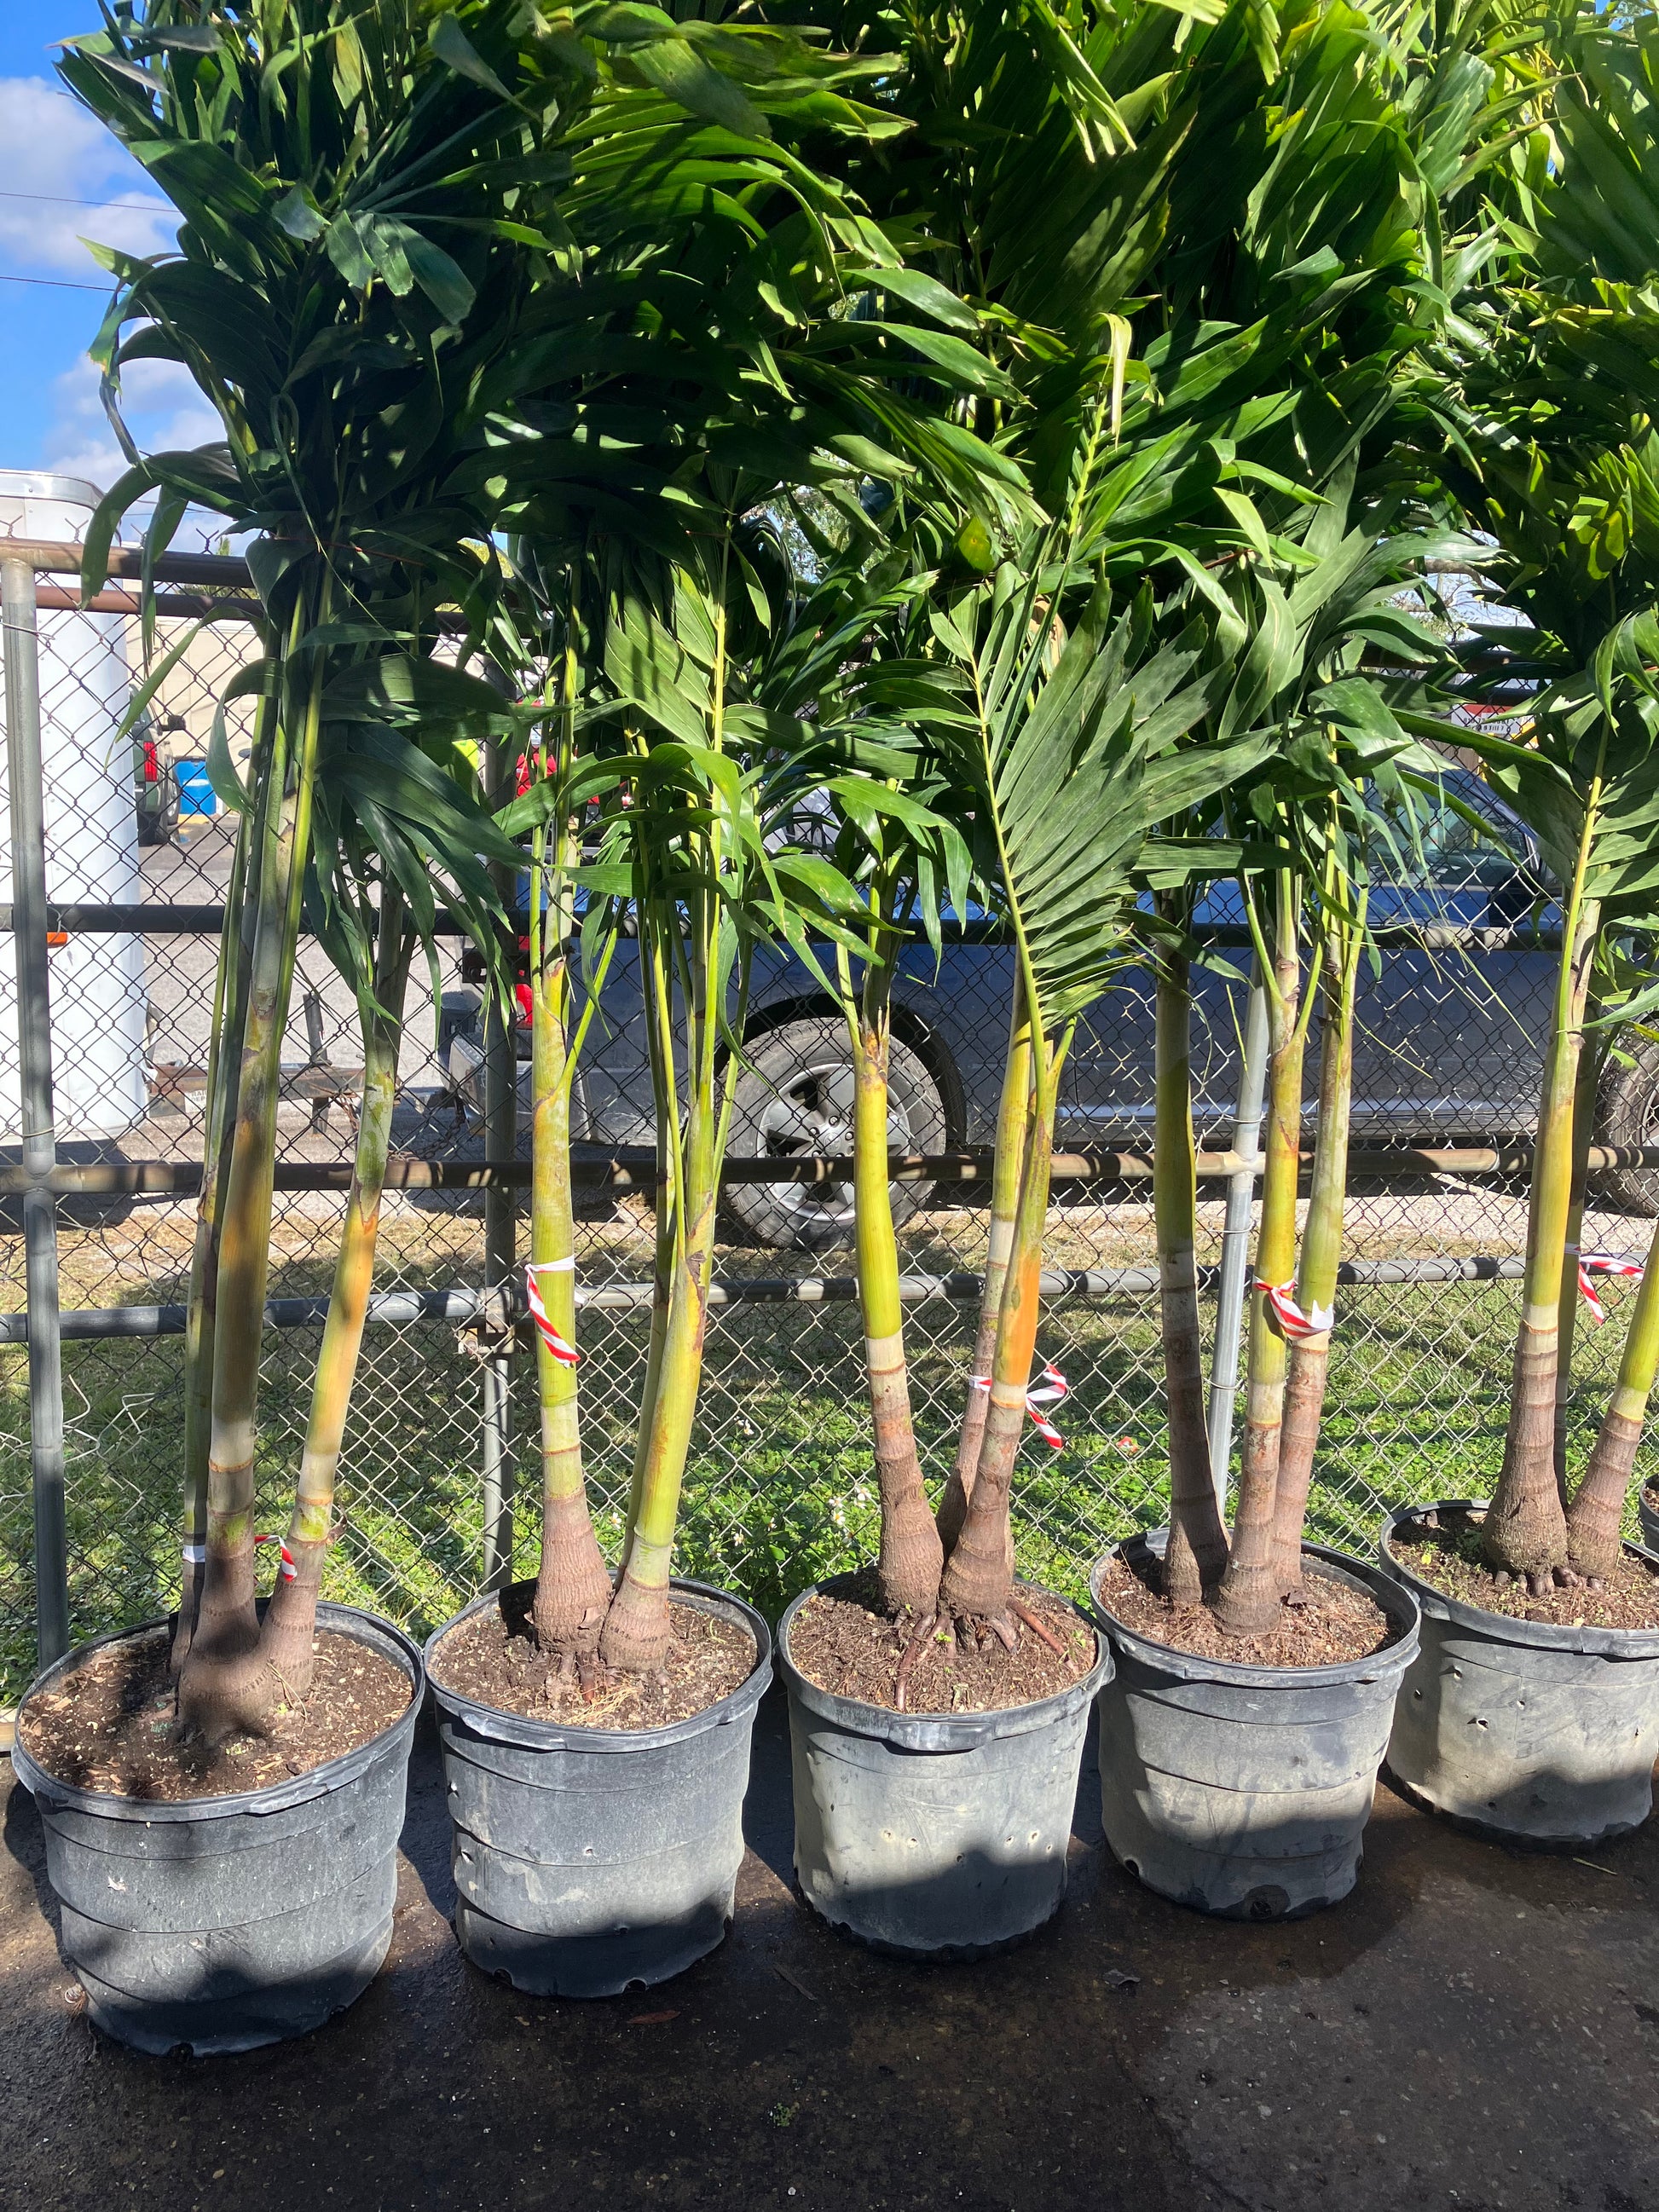 15 Gallon triple trunk Adonidia How to choose the correct size Adonidia or Christmas Palm Tree, height, width, and number of trunks are important to your landscaping project